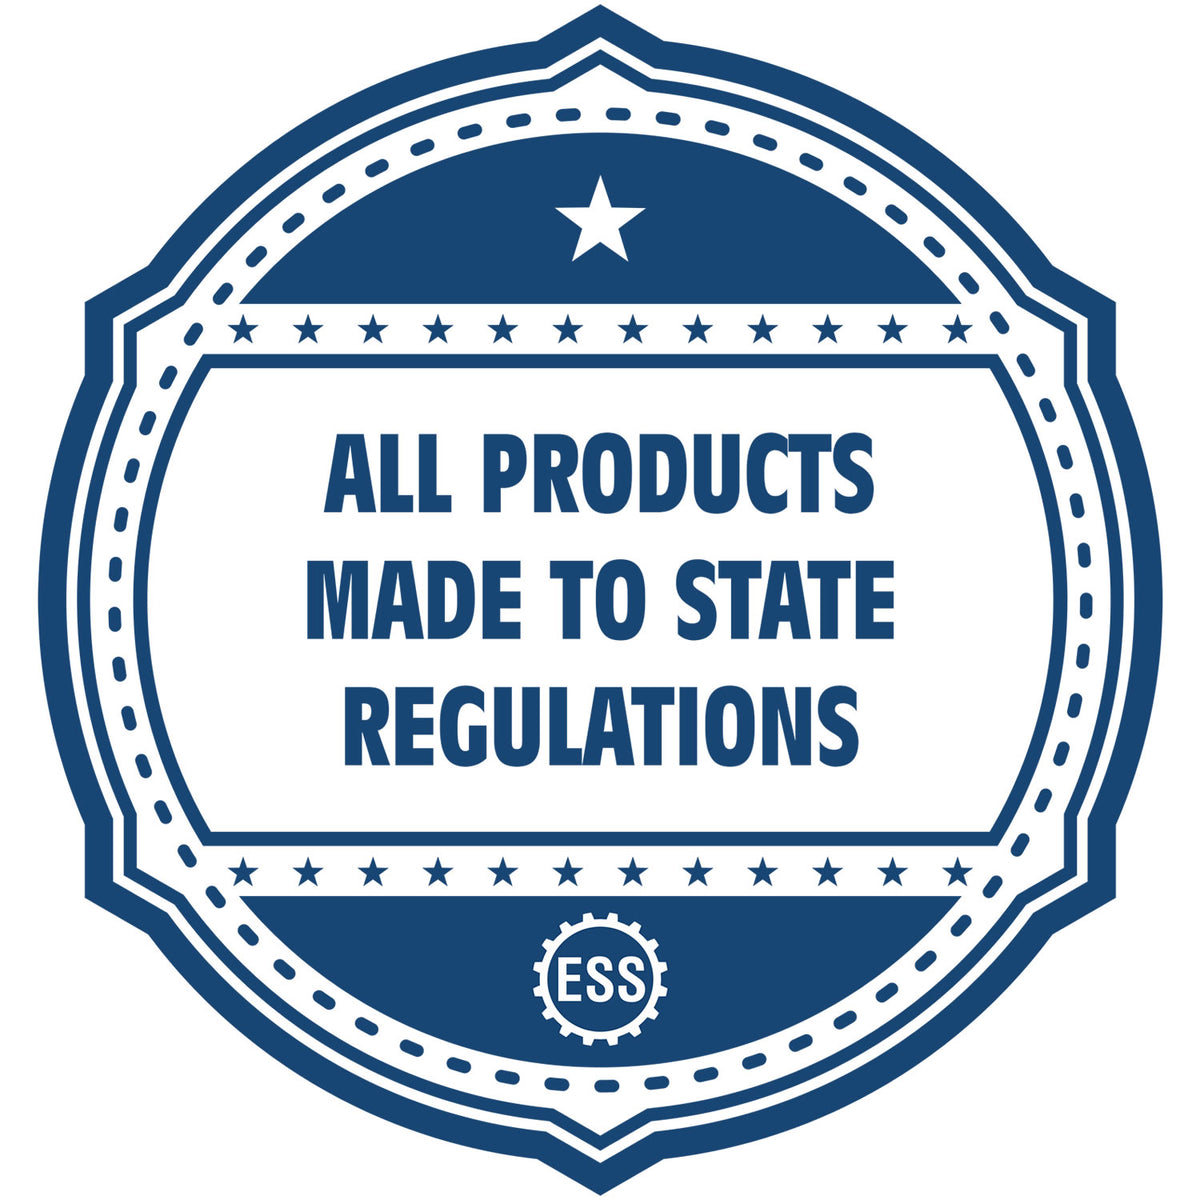 An icon or badge element for the State of Georgia Soft Land Surveyor Embossing Seal showing that this product is made in compliance with state regulations.